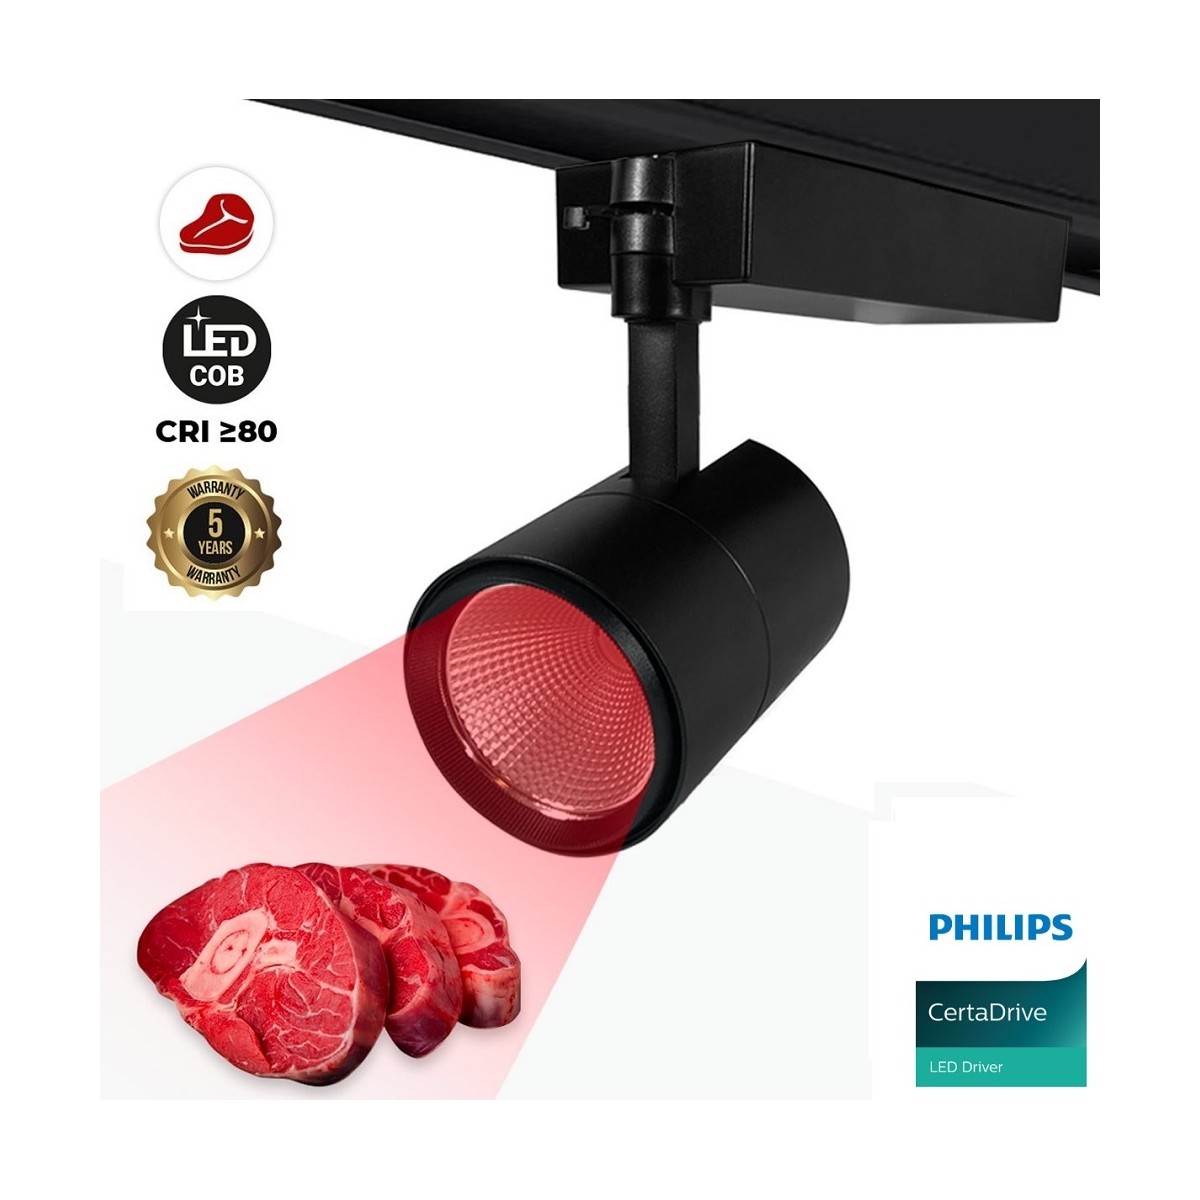 Red de luces LED para uso profesional Sistema IP20, 500 LED, 300 x 300 cm, sin  cable